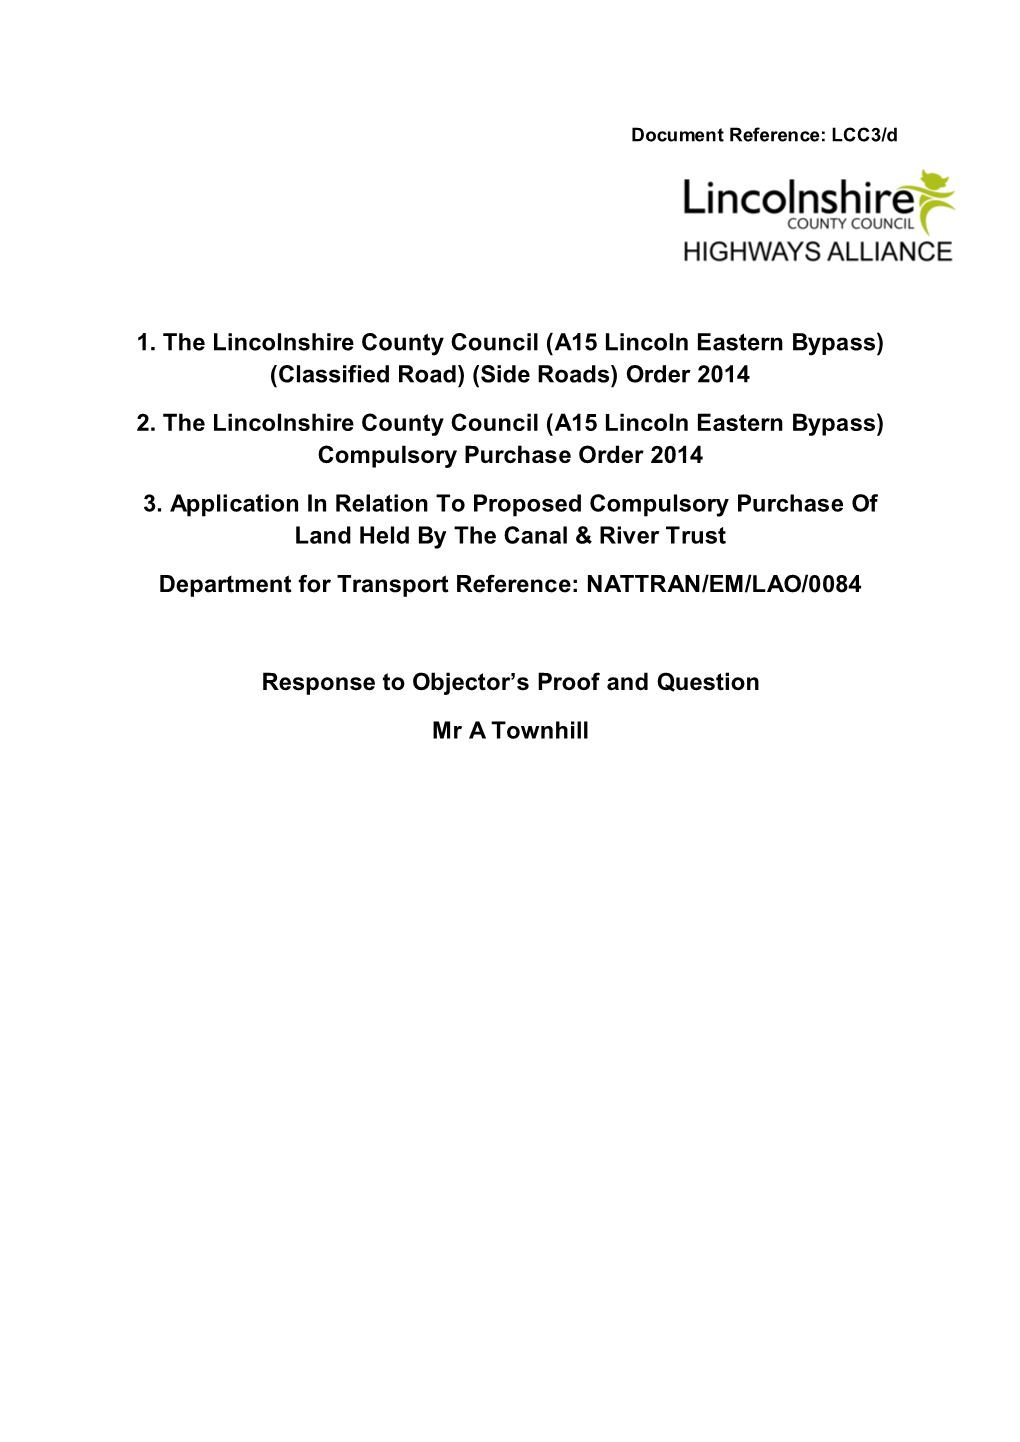 LCC3.D Response from Lincolnshire County Council